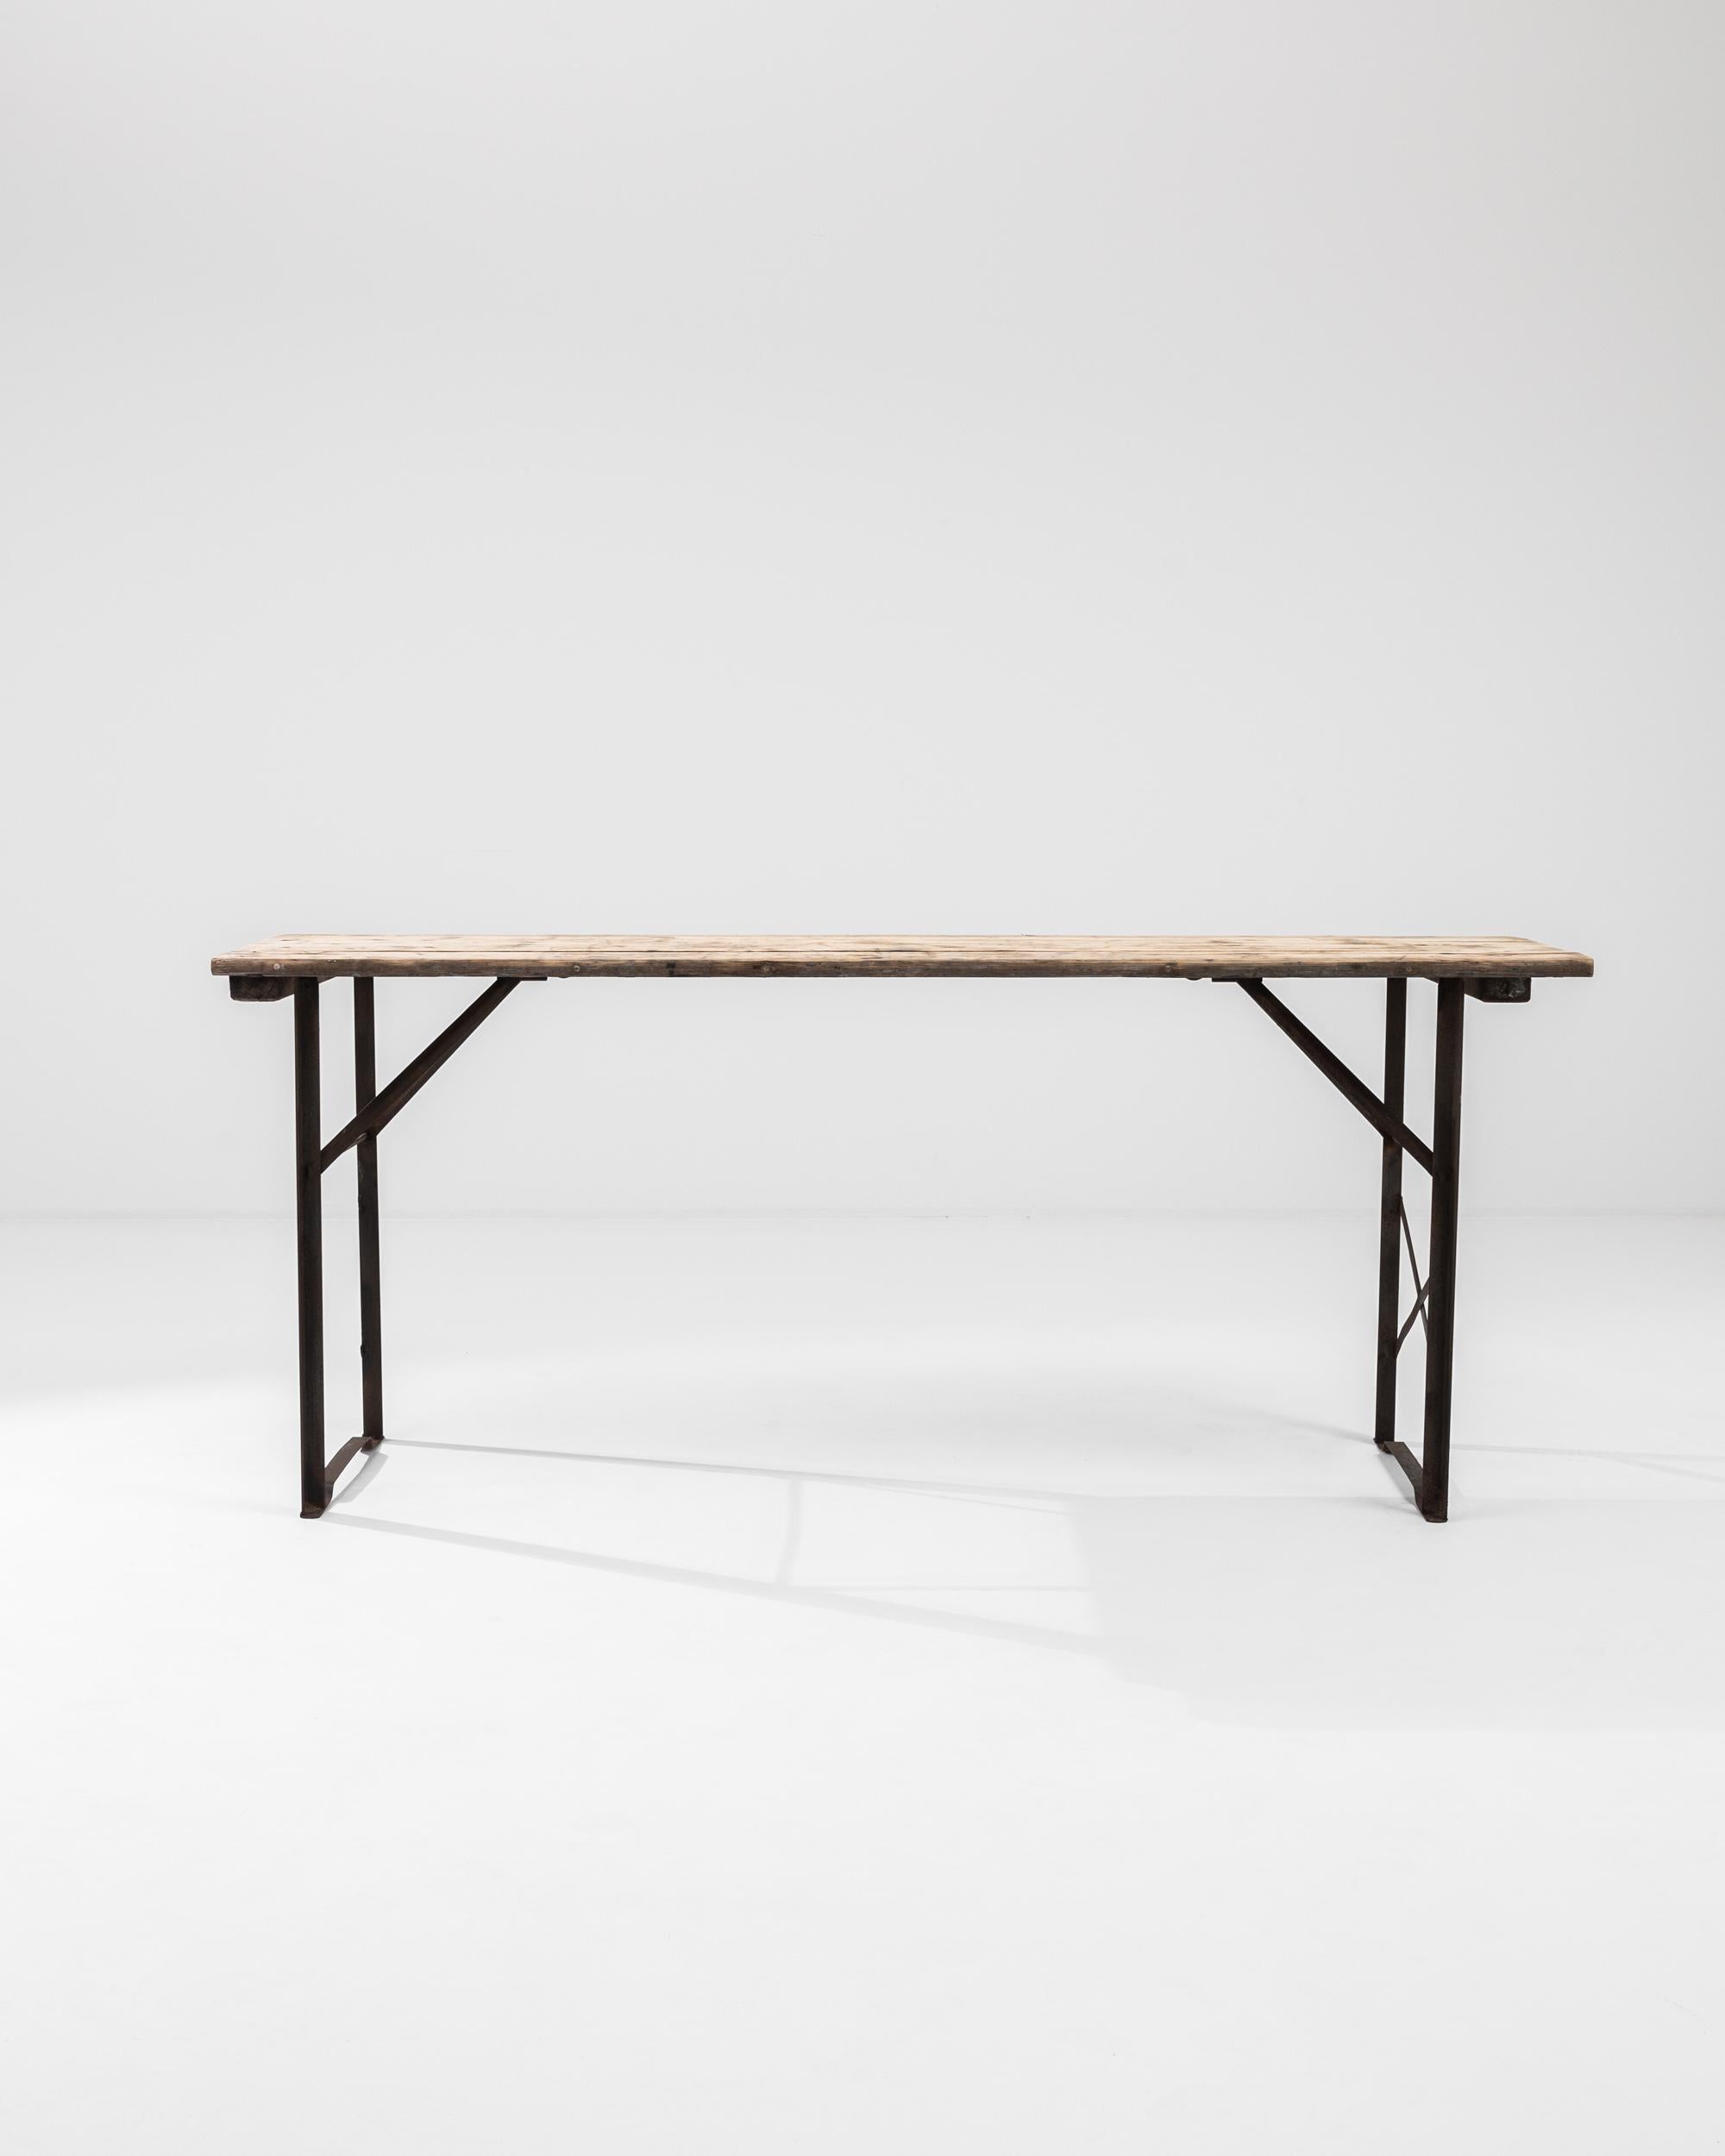 Light and versatile, this Industrial table offers an elegantly functional vintage piece. Made in Belgium in the 1900s, the angular struts of the metal frame have a graphic simplicity. Above, a simple tabletop of wooden boards adds a rustic note. The